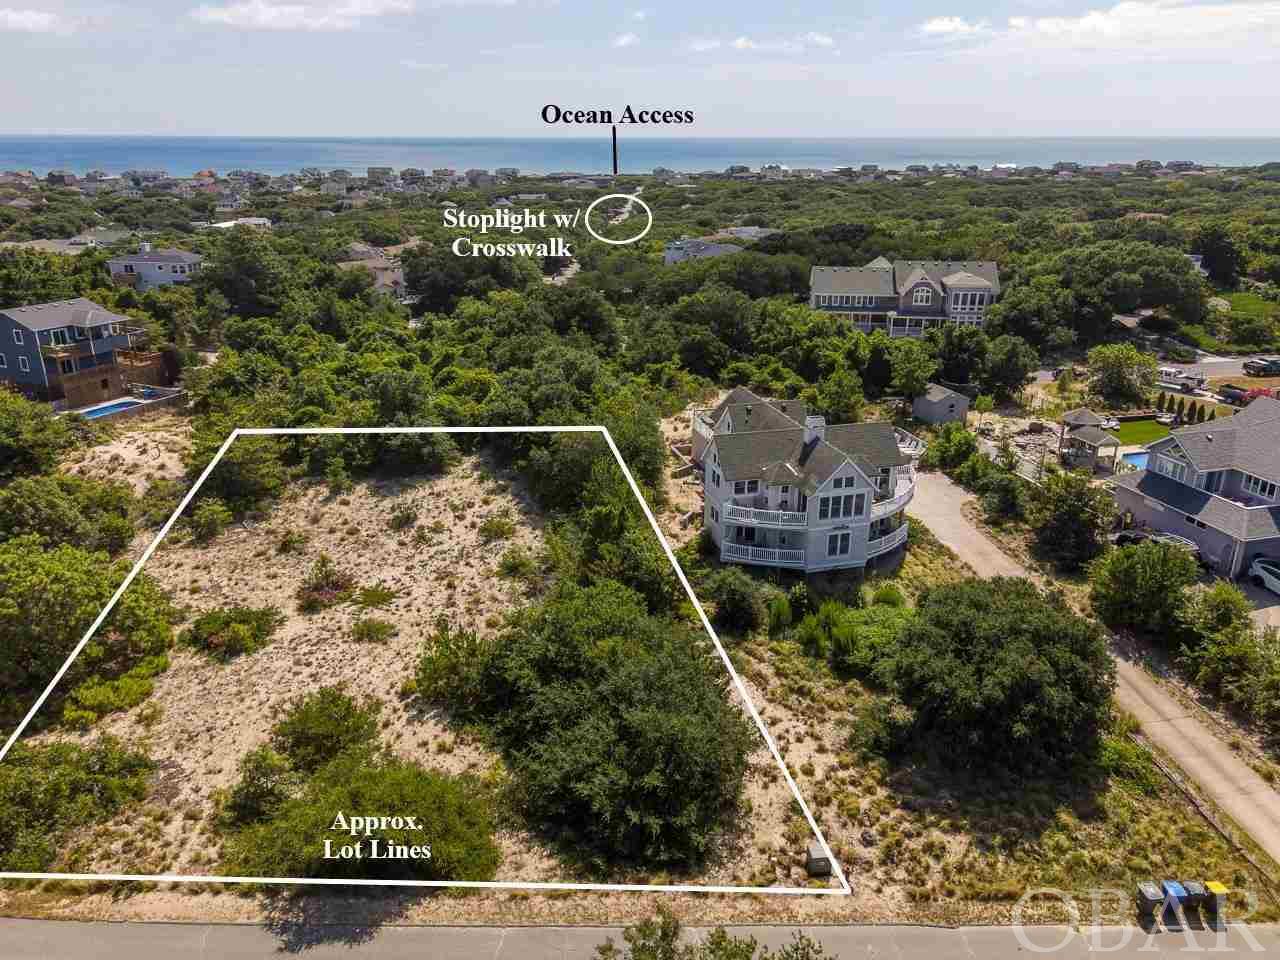 This Primo lot at 51 N Dune Loop is located in a neighborhood so coveted by property owners that homes and land rarely change hands. Without question the best non waterfront lot on the market currently in the Northern Beaches. This lot is one of the highest elevations on the entire Outer Banks at 46 feet above sea level and climbing !! Enjoy panoramic sound views and sweeping ocean views on the horizon from your home on top of the hill. Rest easy and Never worry about flooding here. Super Fun and friendly neighbors along with quiet roads make this a solid place to call home. An easy walk to the ocean access via Sea Oats Trail, with stoplight to safely cross Duck Road. HOA fee is voluntary, but is only $65 for primary/second home owners and $95 for rental homes. Boat Club and/or Tennis Club annual dues are $25 each.